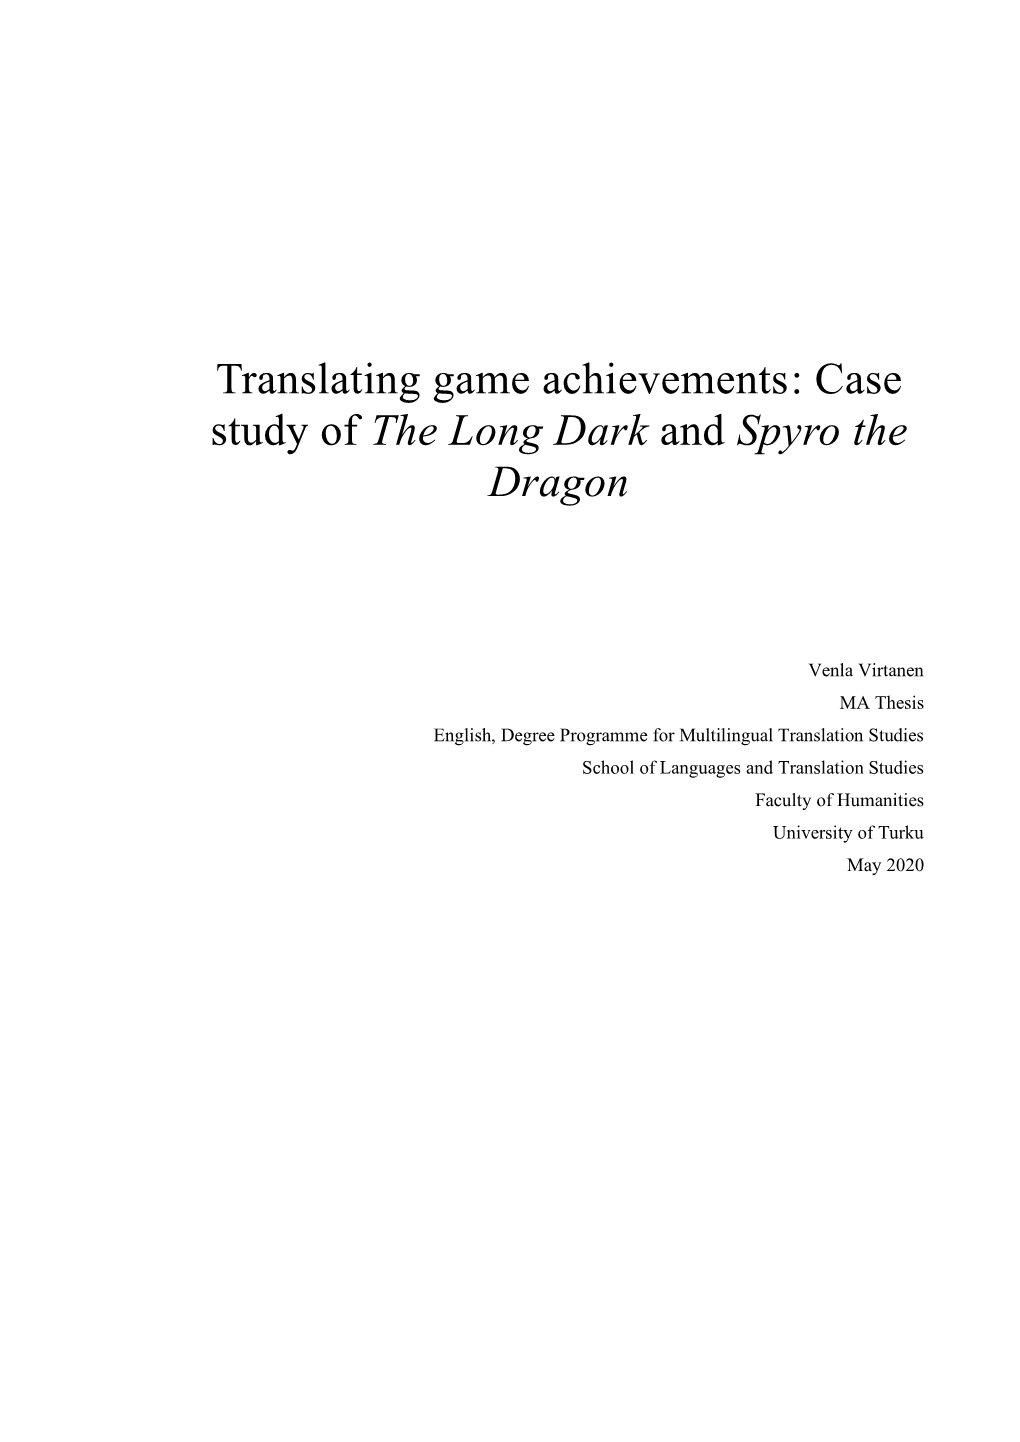 Translating Game Achievements Case Study Of The Long Dark And Spyro